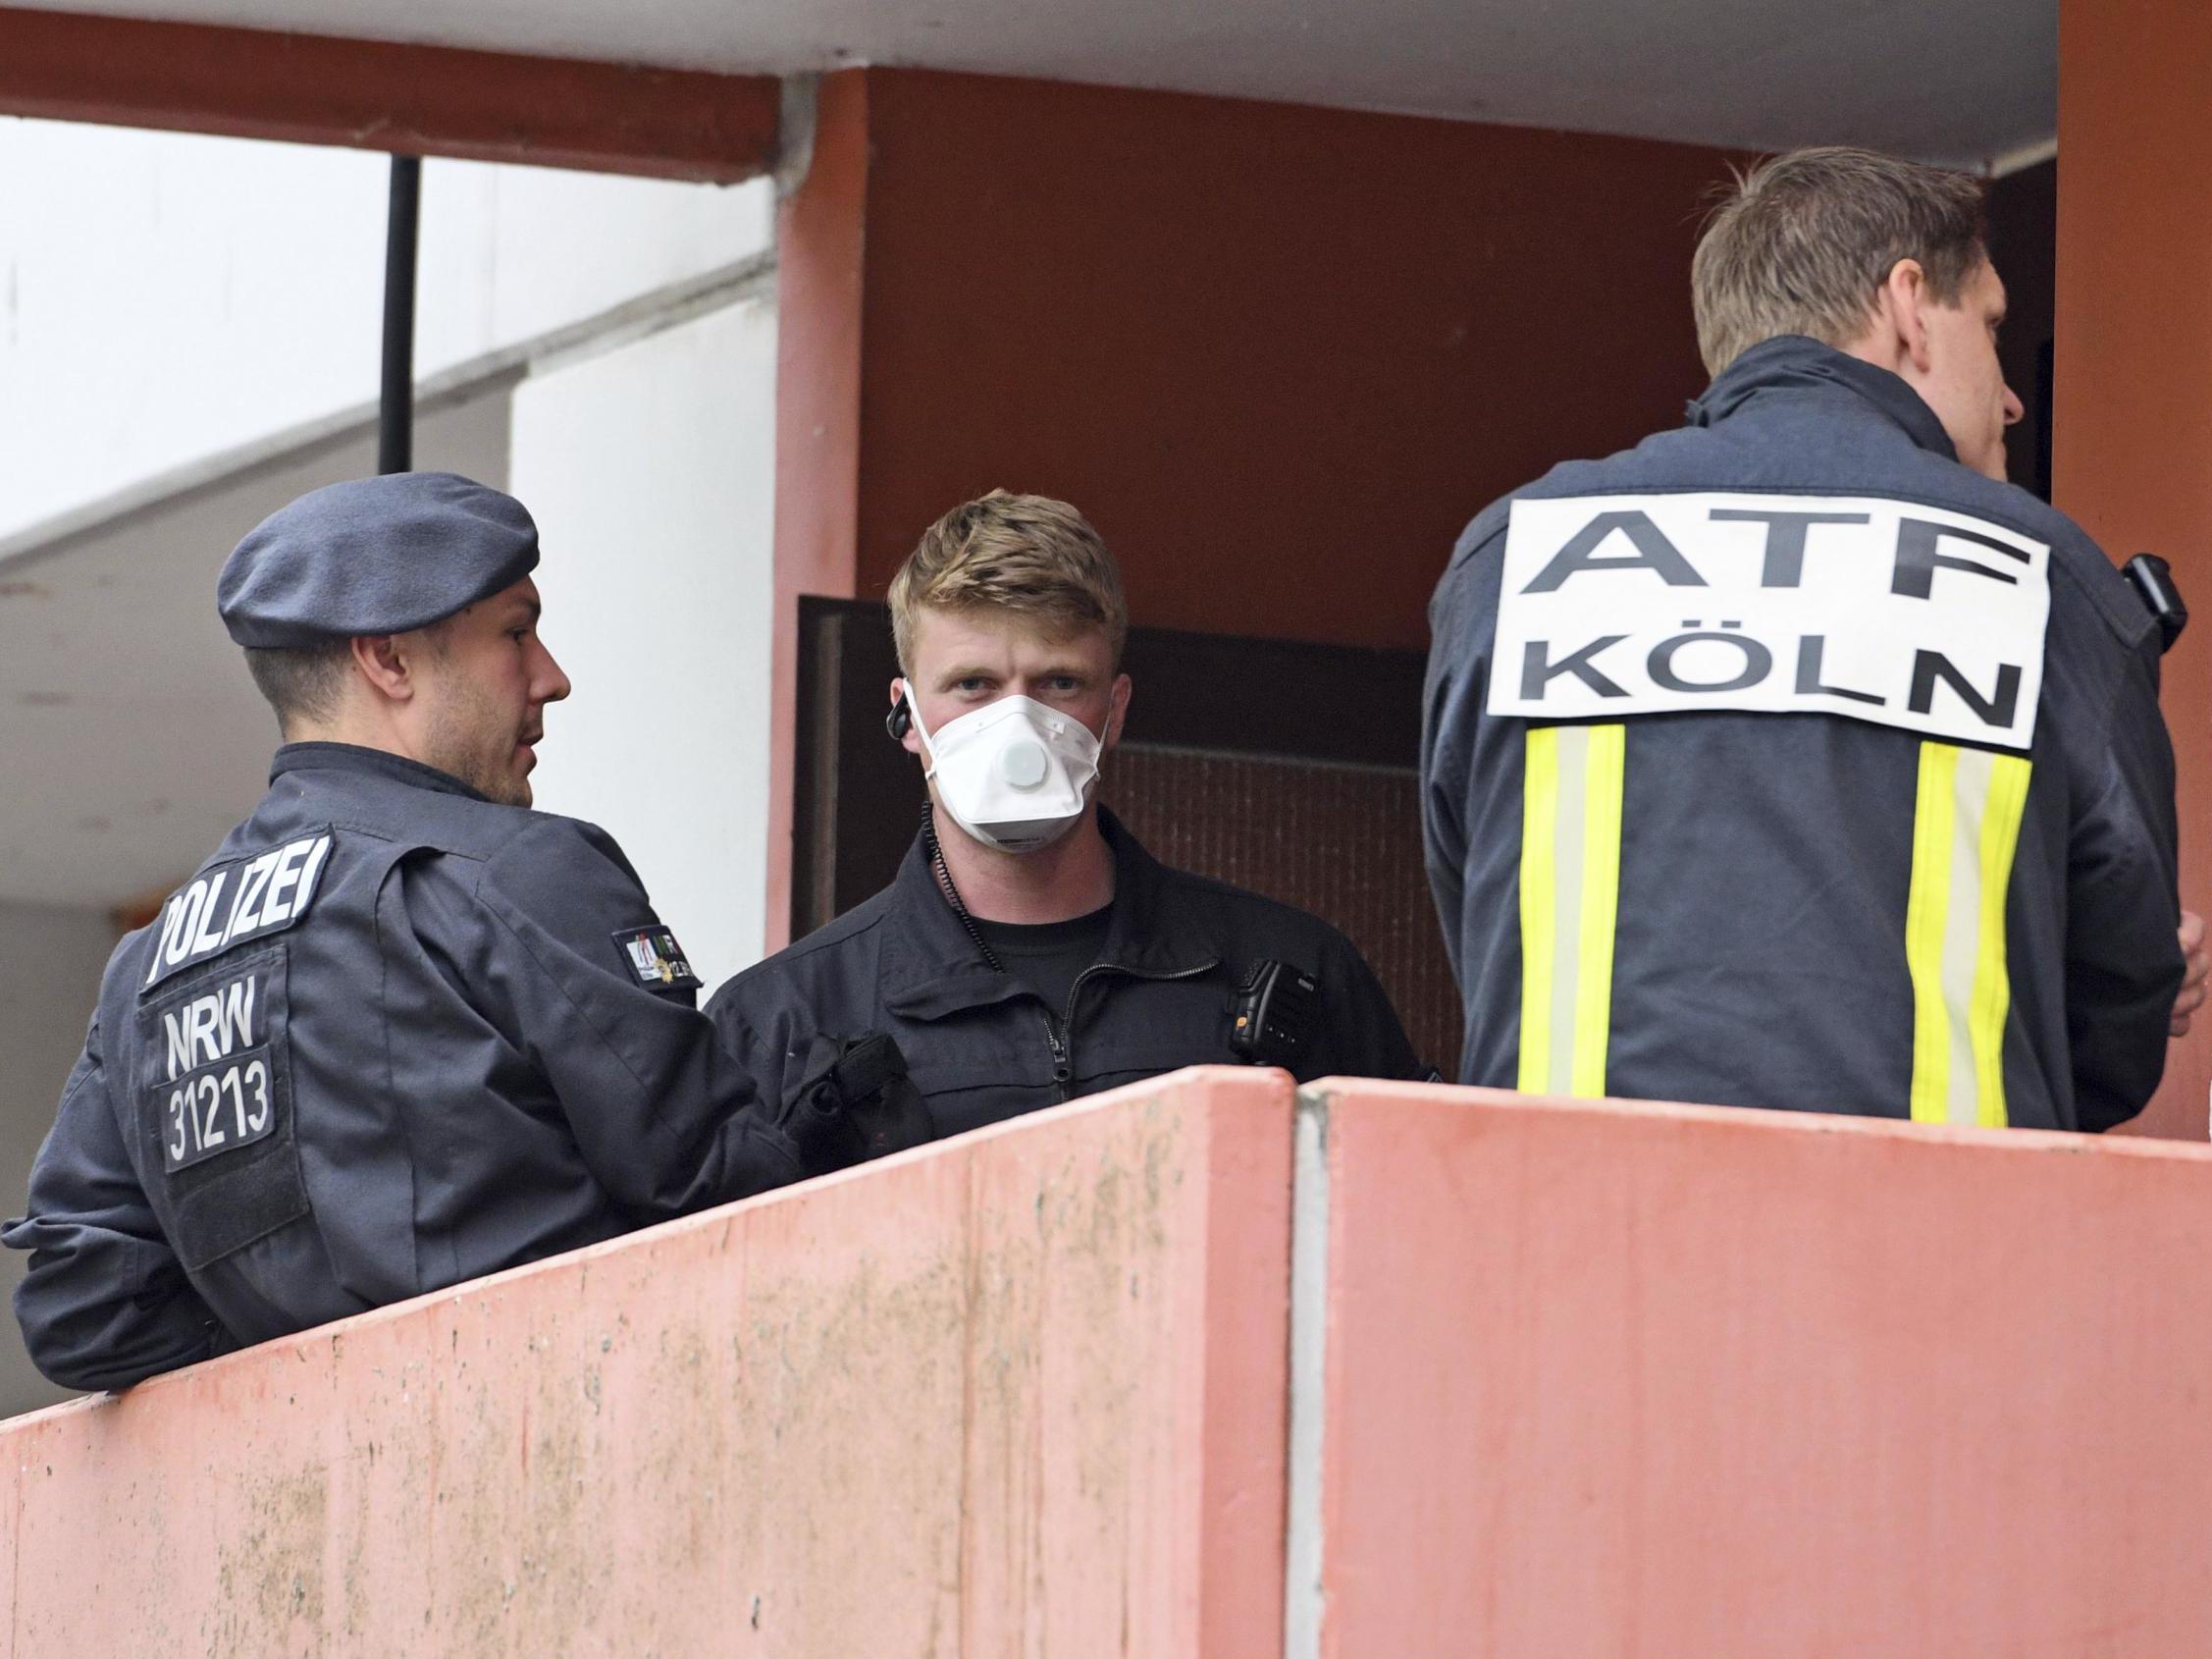 Police found a quantity of the deadly poison ricin during a raid at a flat in Cologne in June